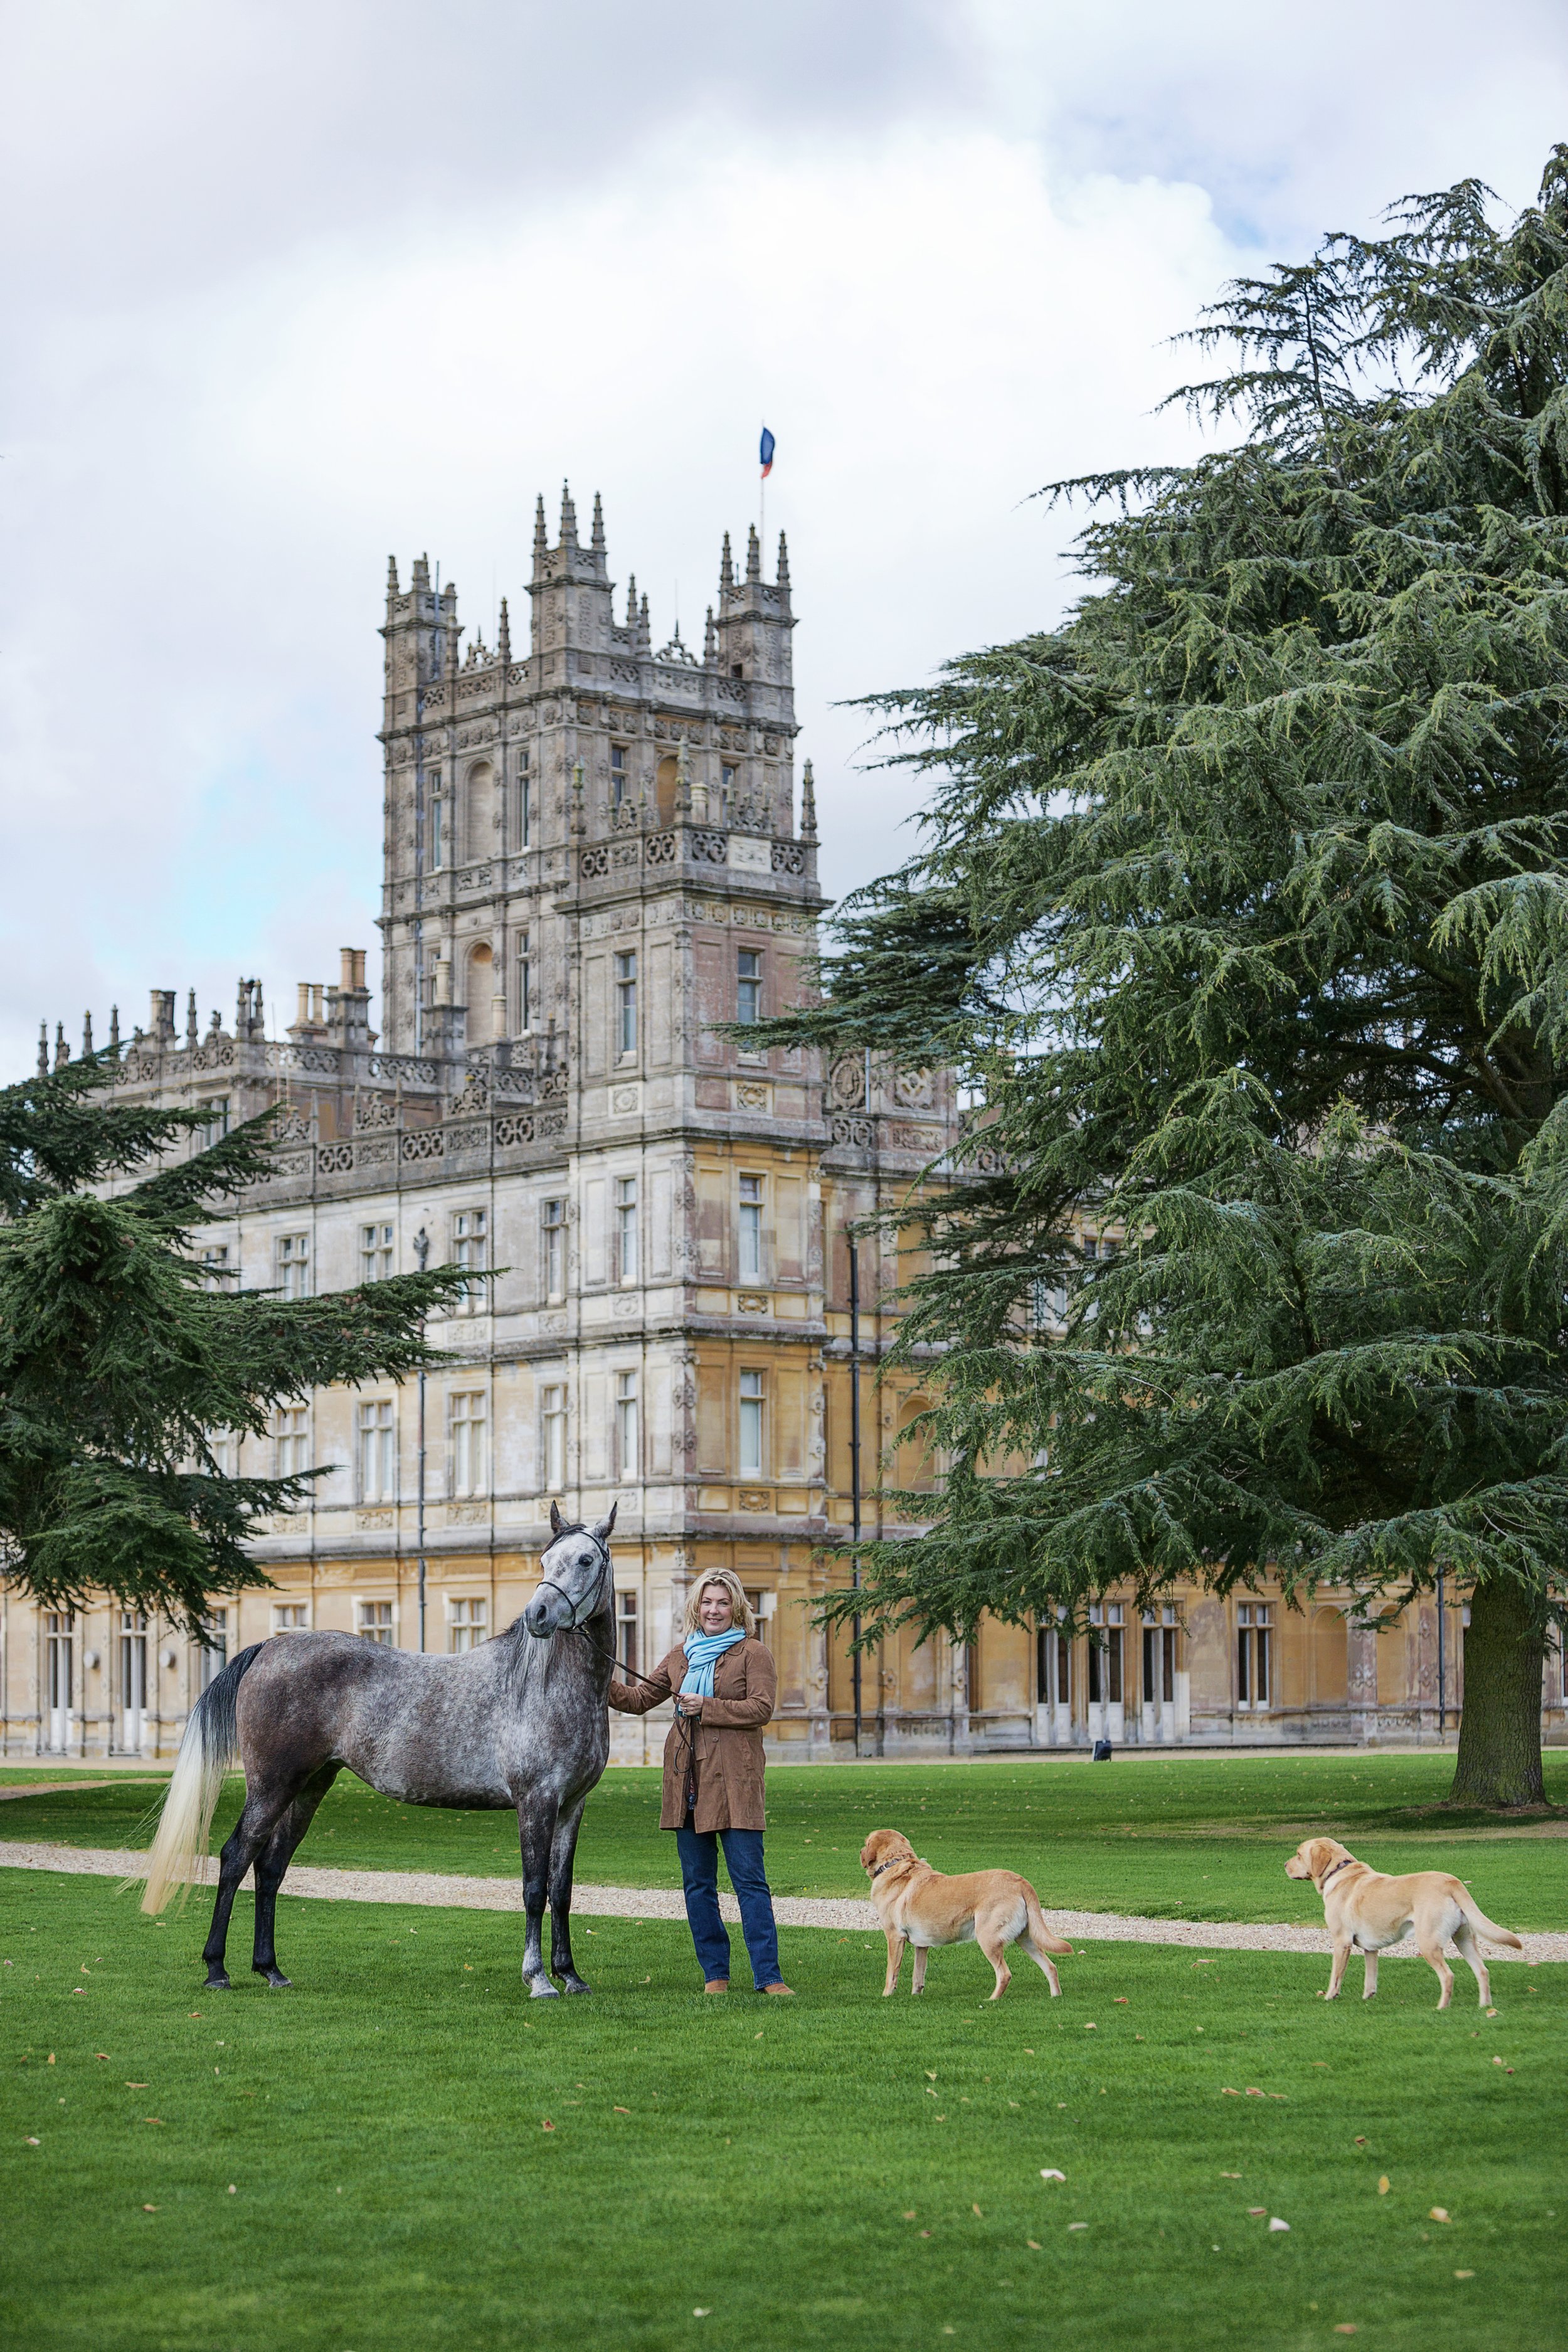  Lady Carnarvon offers a glimpse of life at Highclere Castle, sharing the stories and history of the iconic building and gardens, including the people and animals who live and work there, through her blog, podcasts and social media. She also is an au